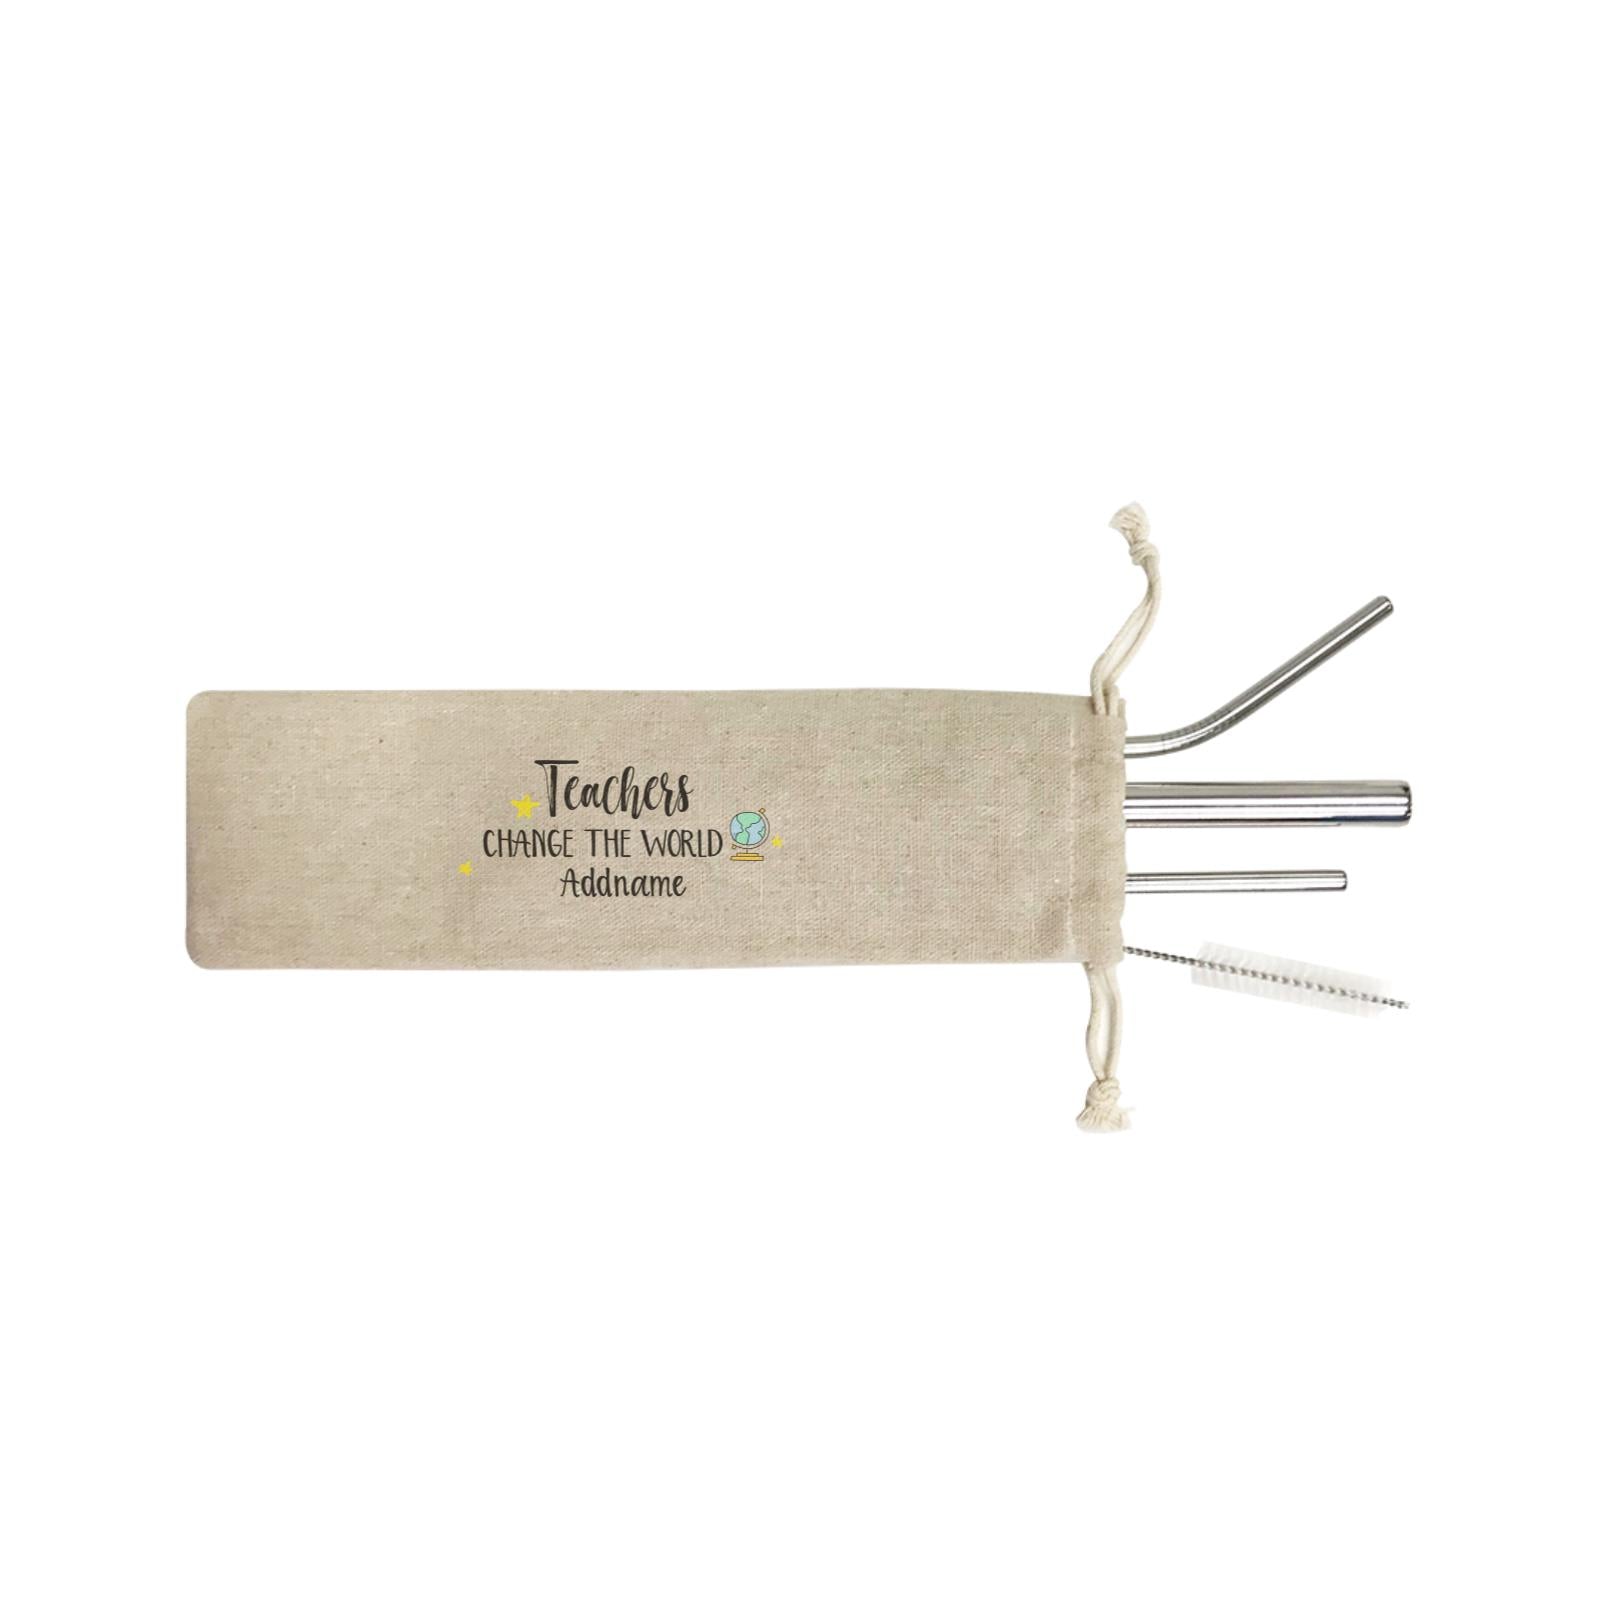 Teacher Quotes Teachers Change The World Addname SB 4-In-1 Stainless Steel Straw Set in Satchel